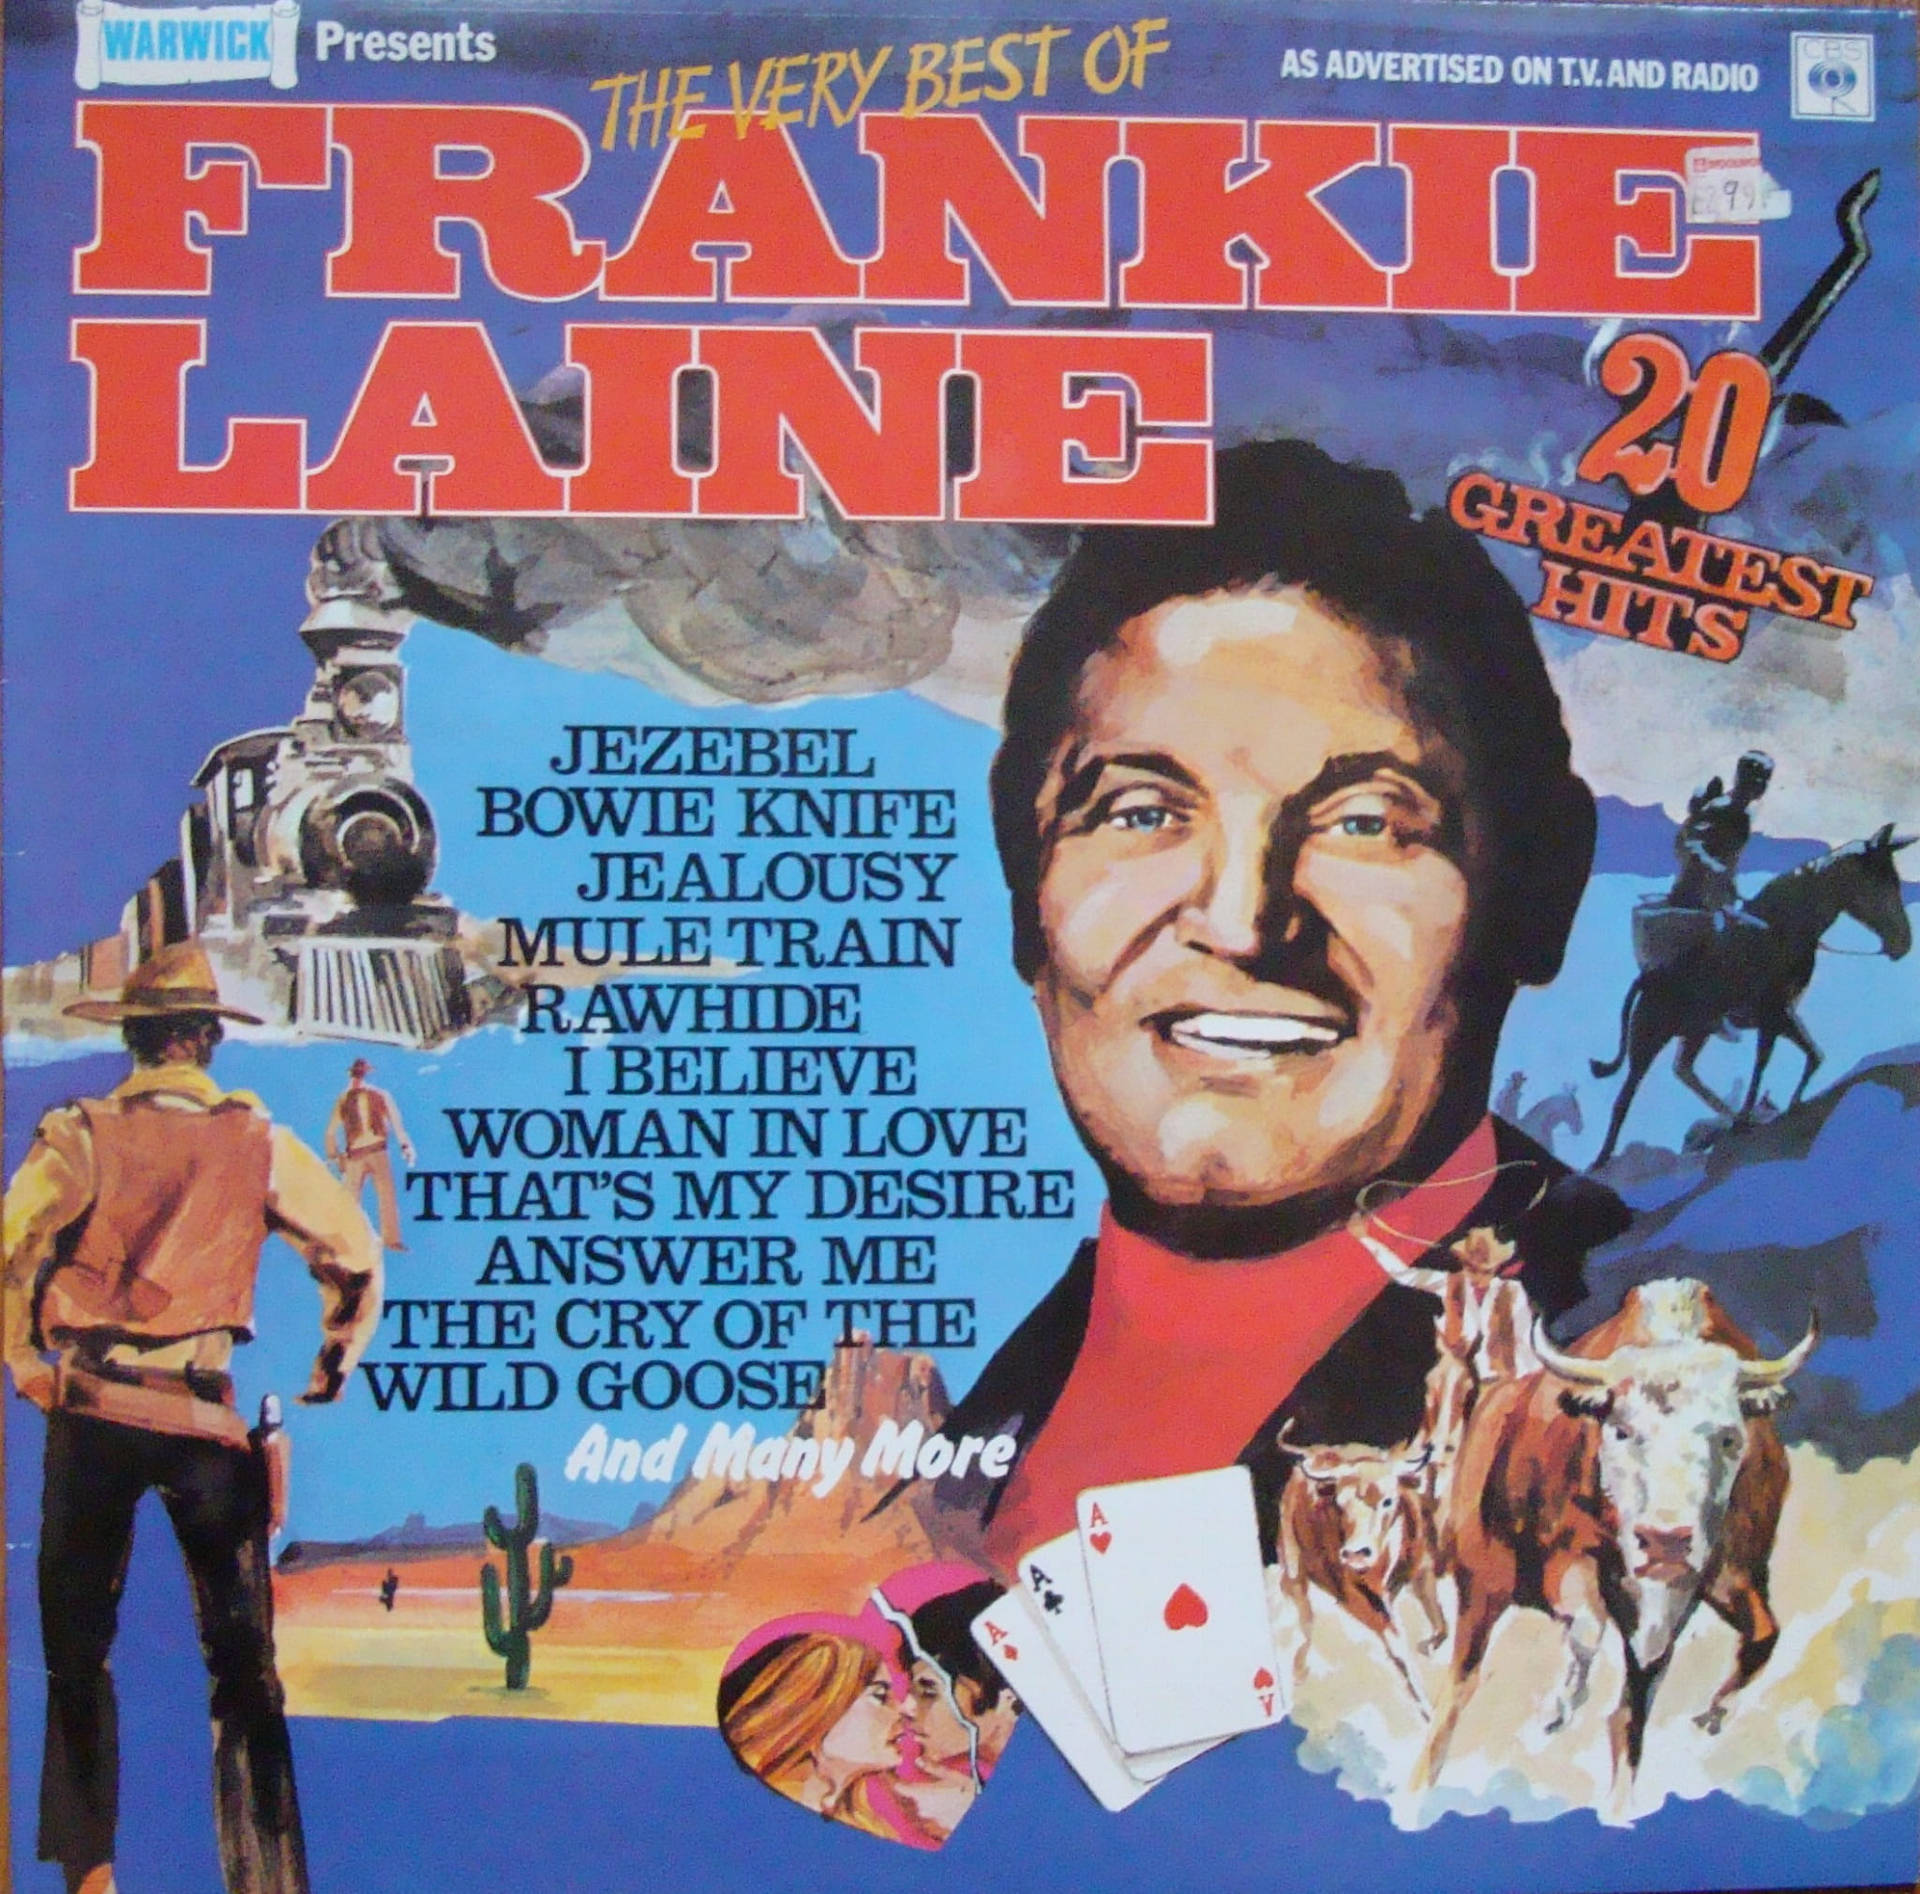 The Very Best Of Frankie Laine Album Cover Wallpaper